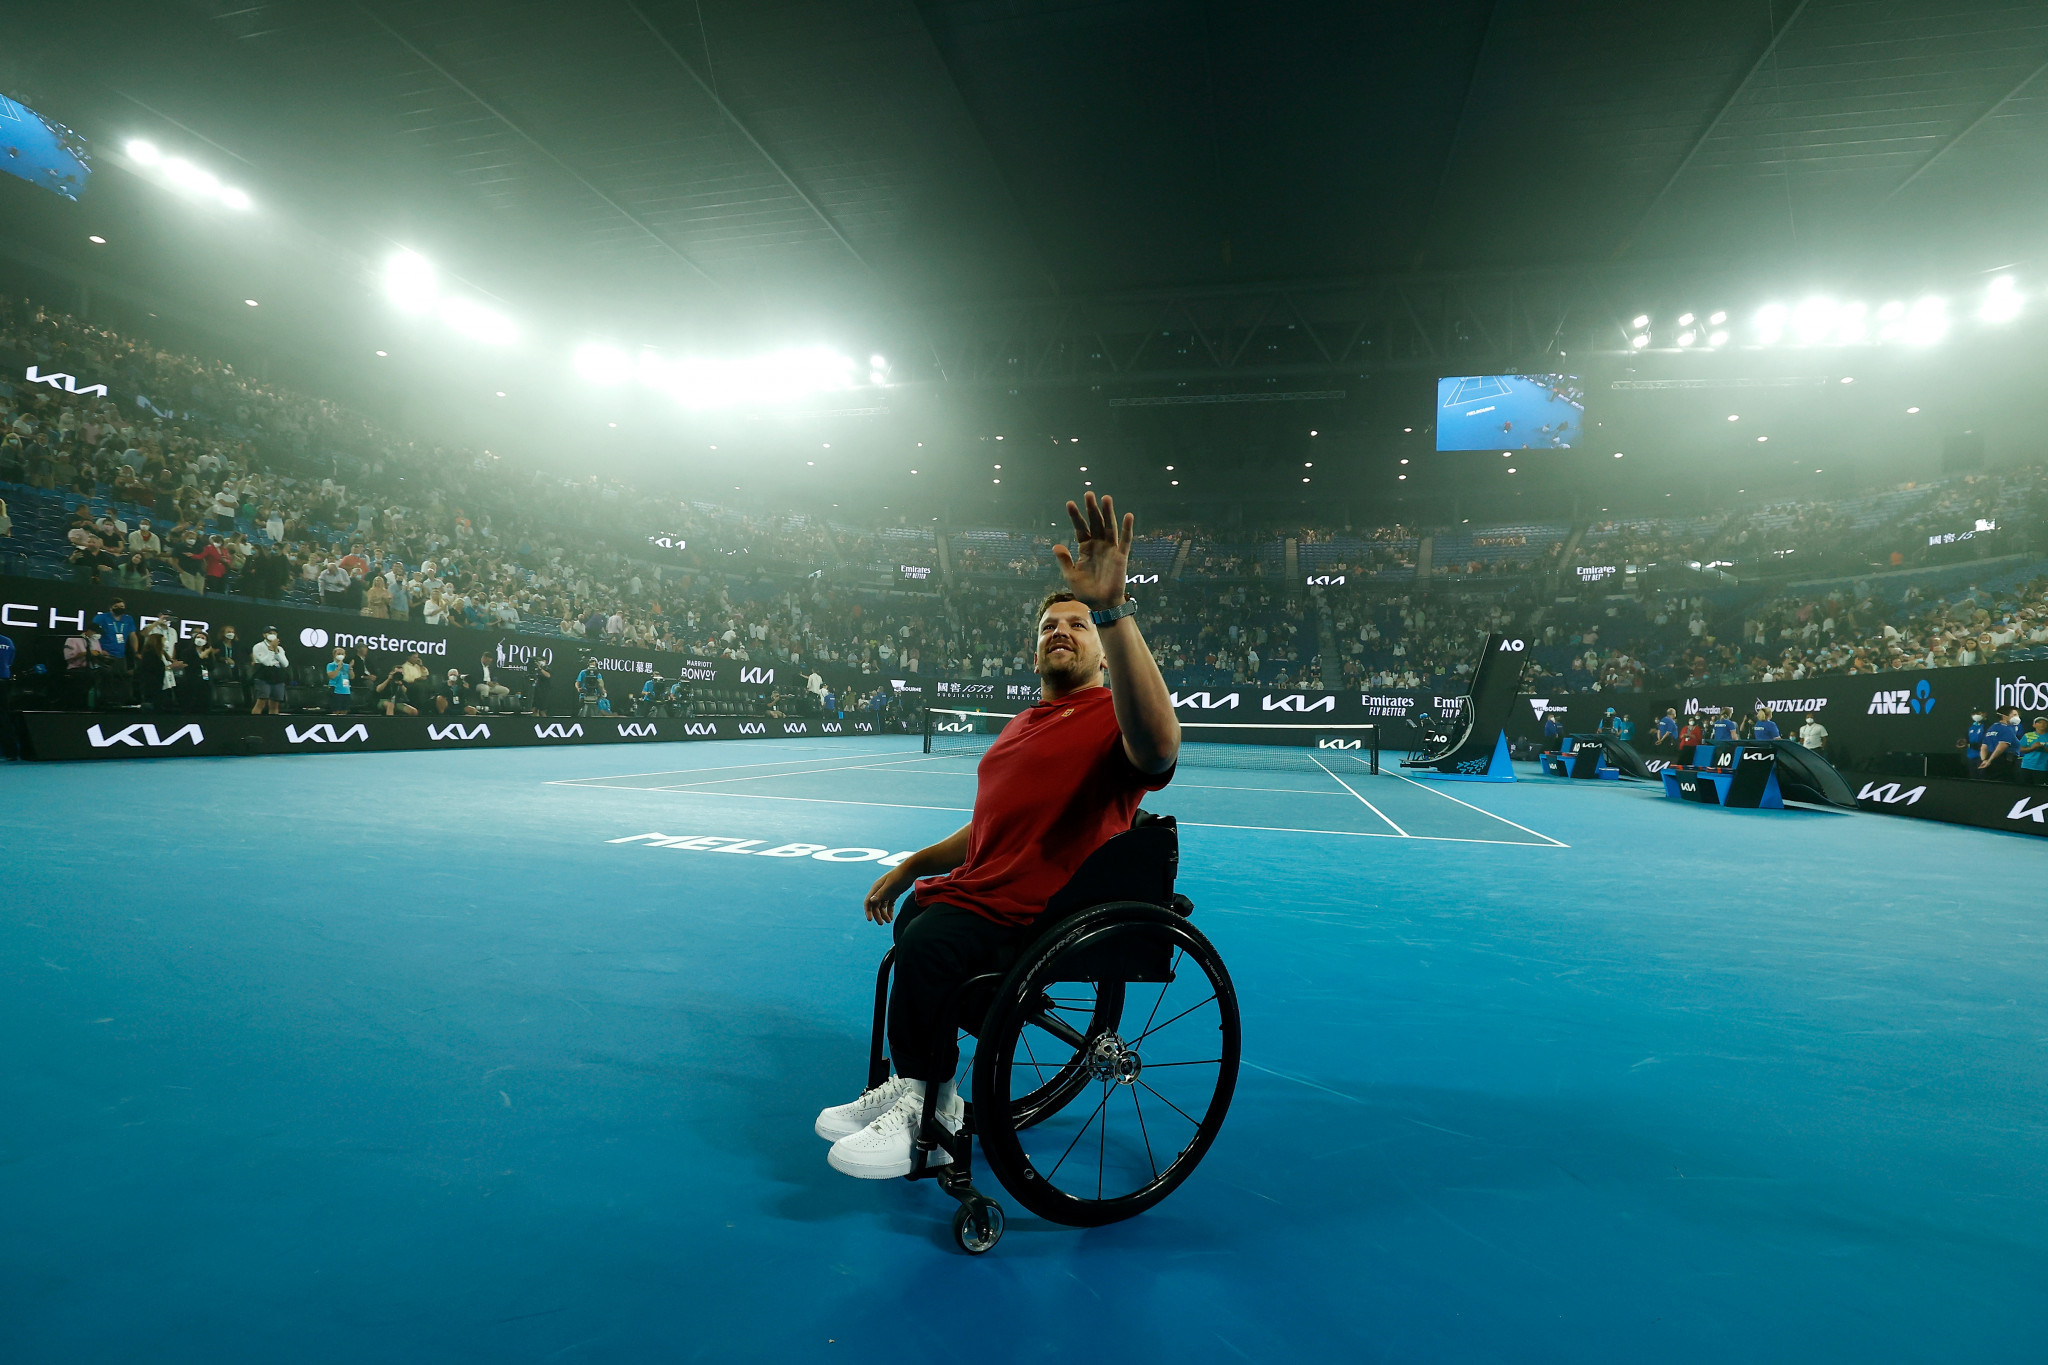 Dylan Alcott retired from wheelchair tennis after the Australian Open in January ©Getty Images